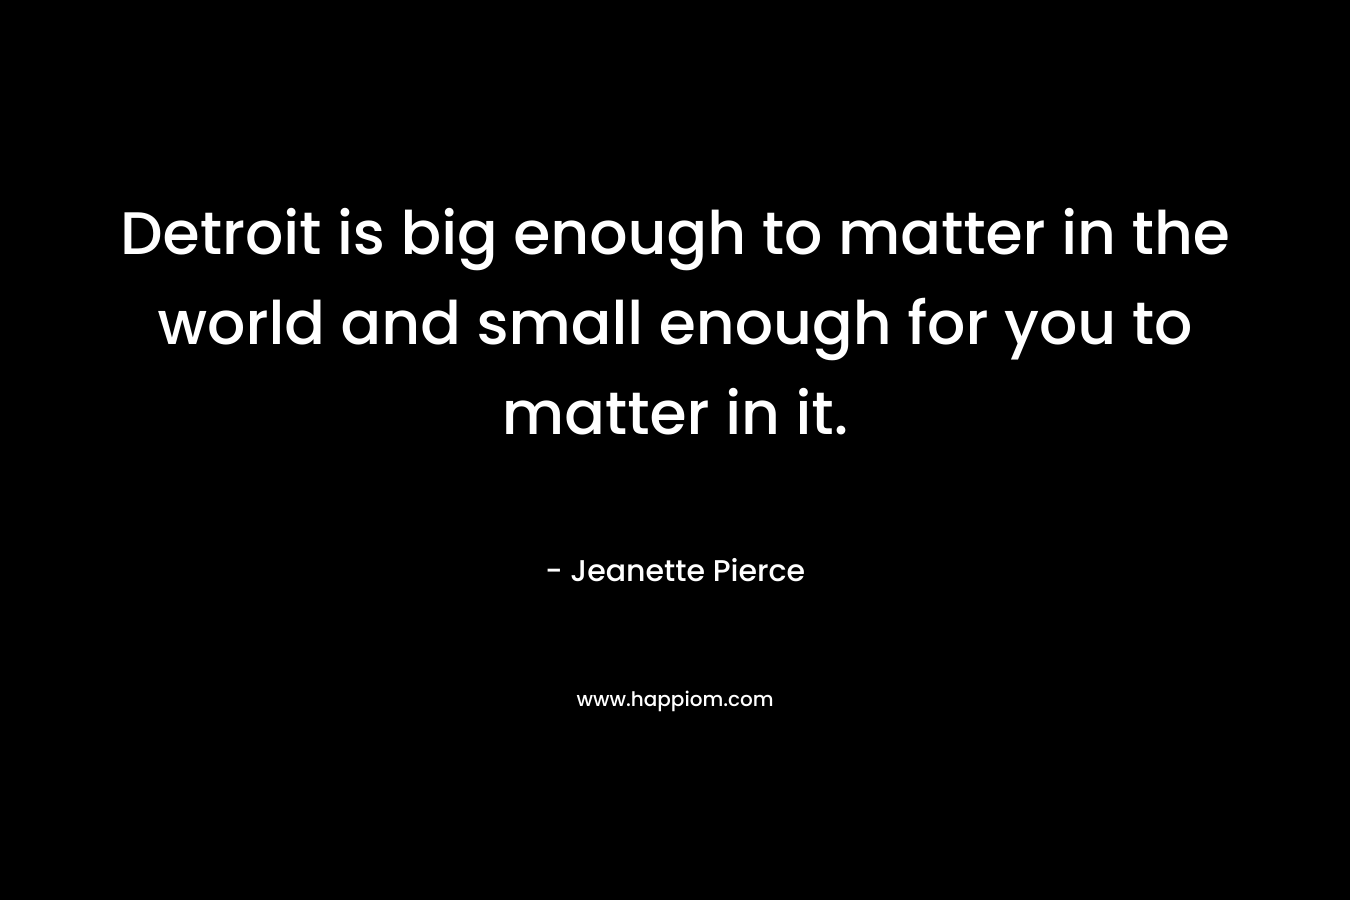 Detroit is big enough to matter in the world and small enough for you to matter in it. – Jeanette Pierce